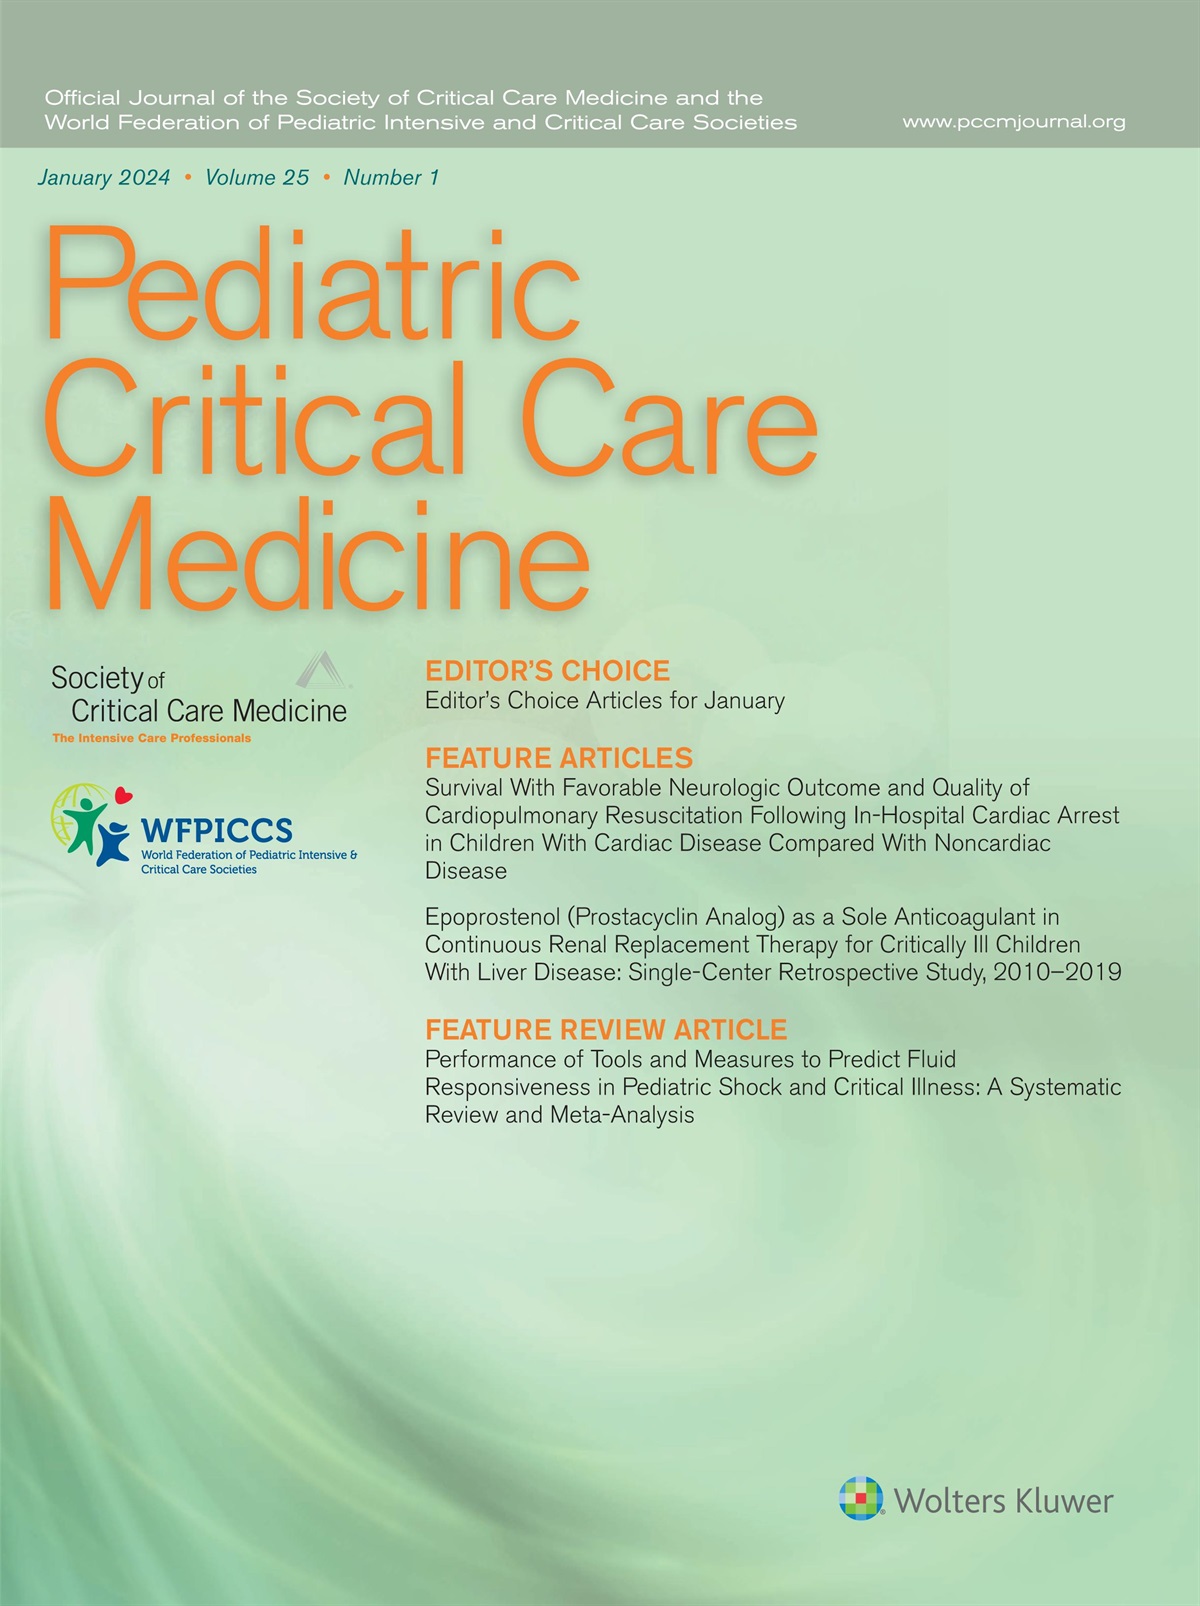 Quality of Cardiopulmonary Resuscitation in Children With Cardiac and Noncardiac Disease: Comparing Apples and Oranges?*